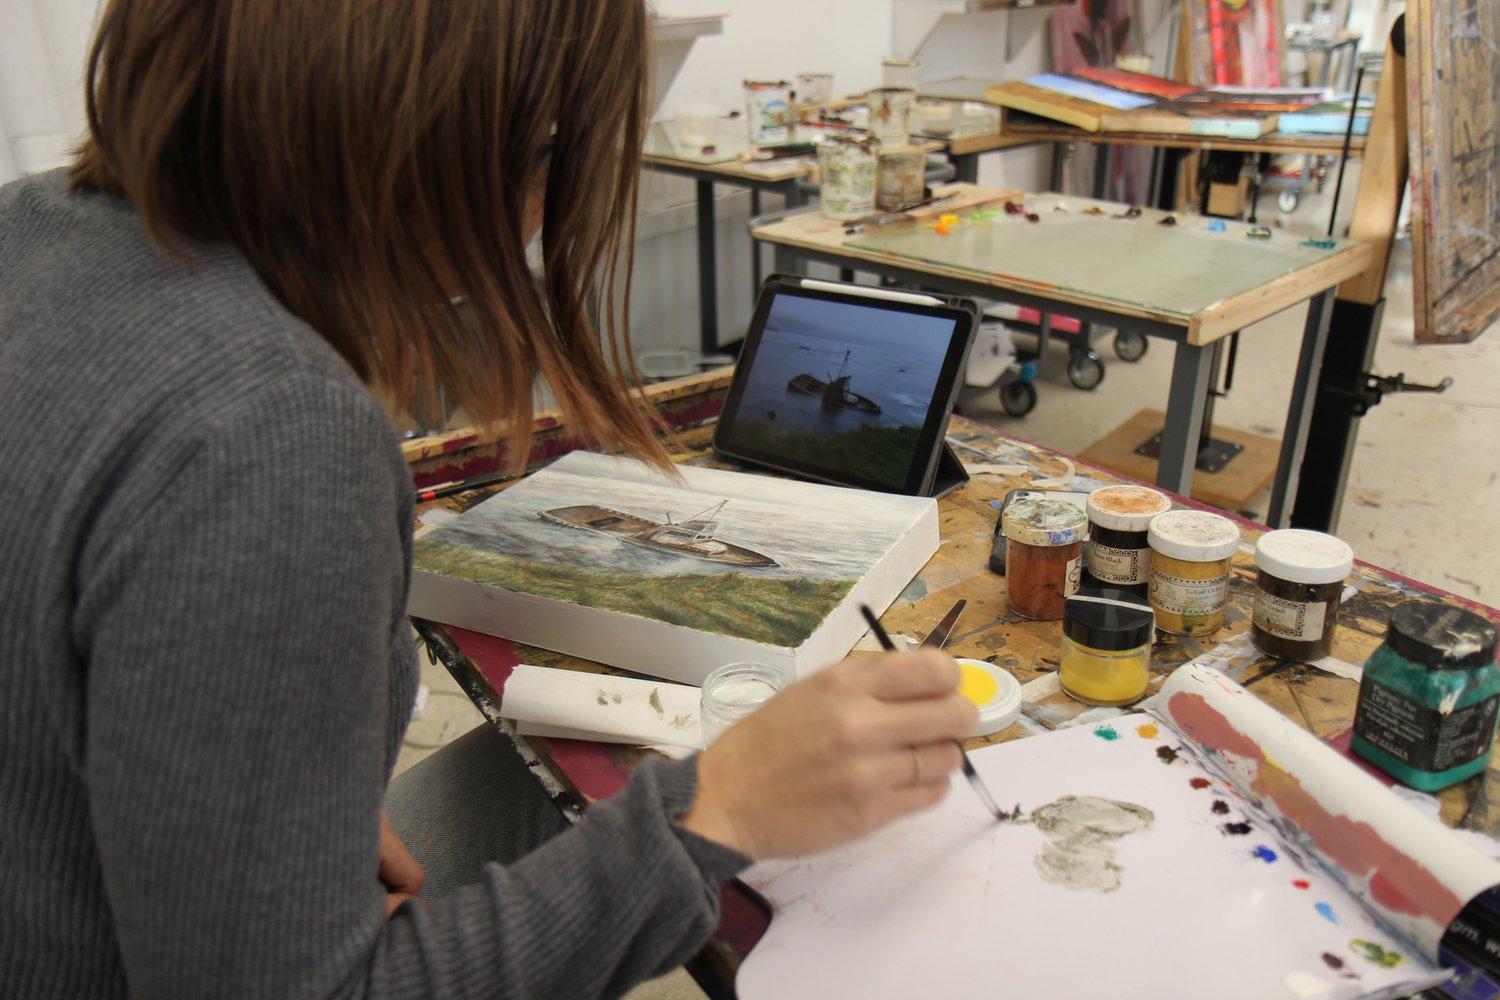 Painting III course. Student paints a landscape using egg tempera the class created.